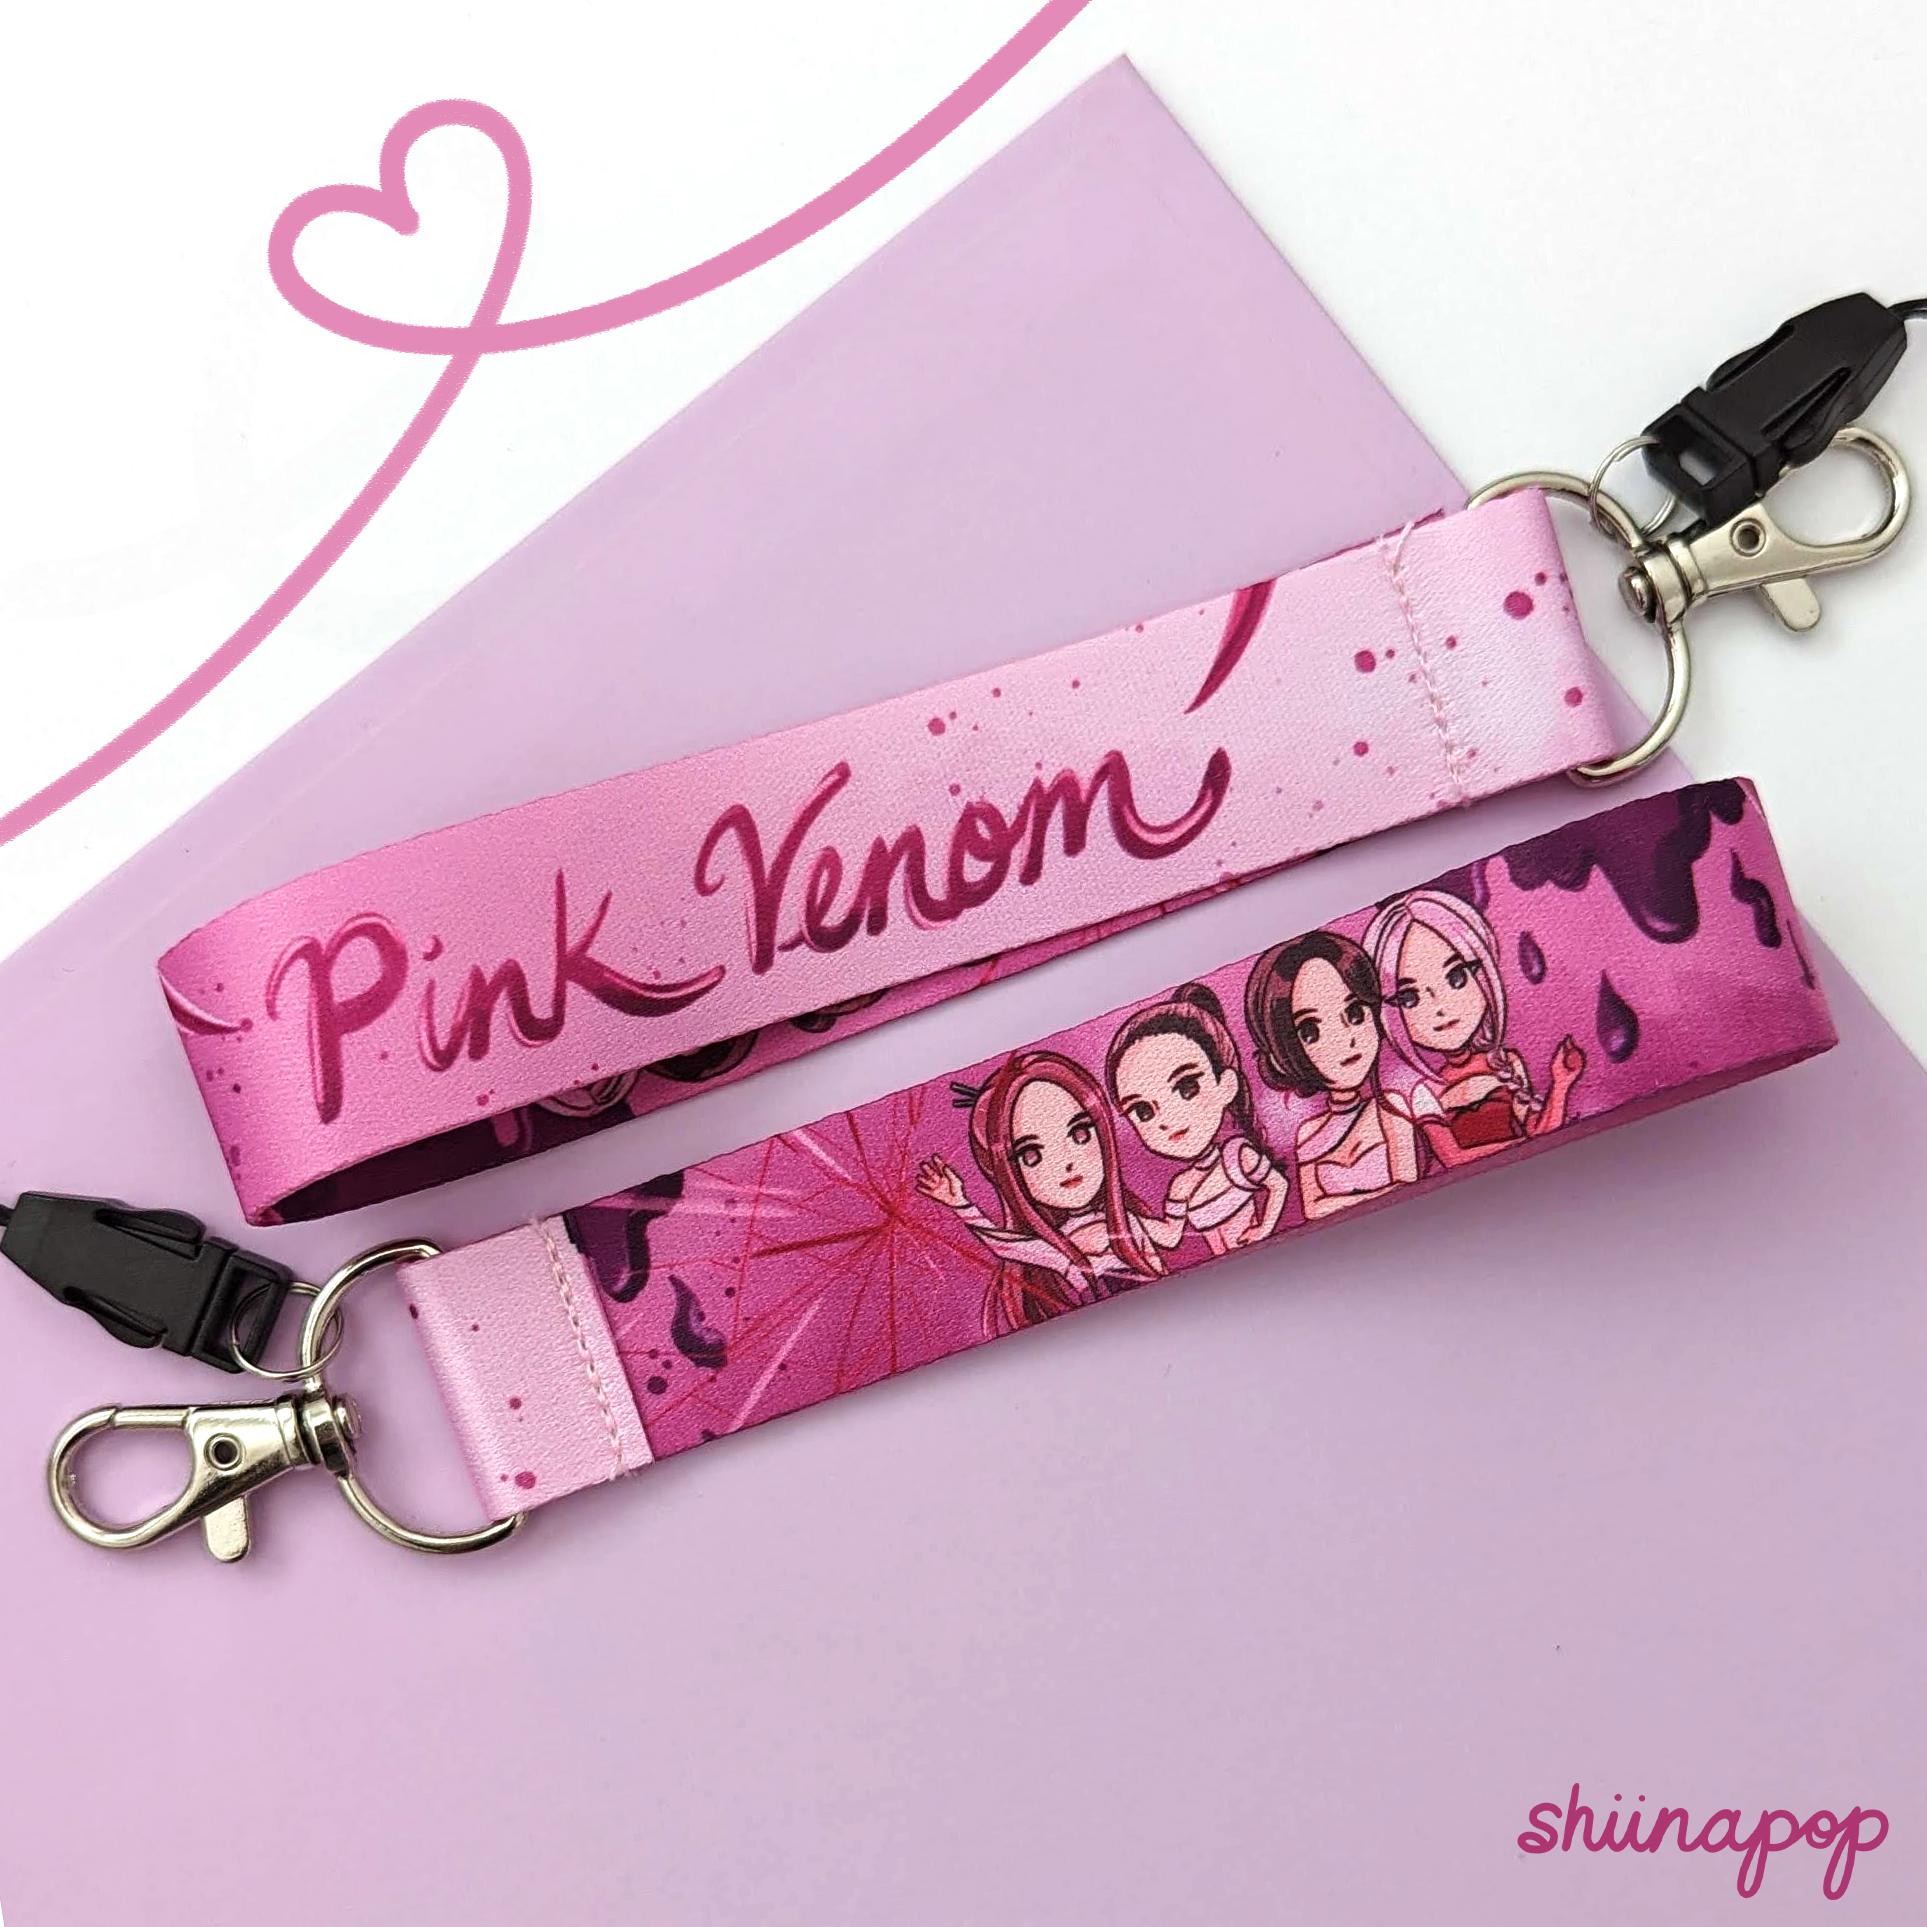 230911 Made a Pink Venom wrist strap design! Can be used with your Bl-ping-bong!